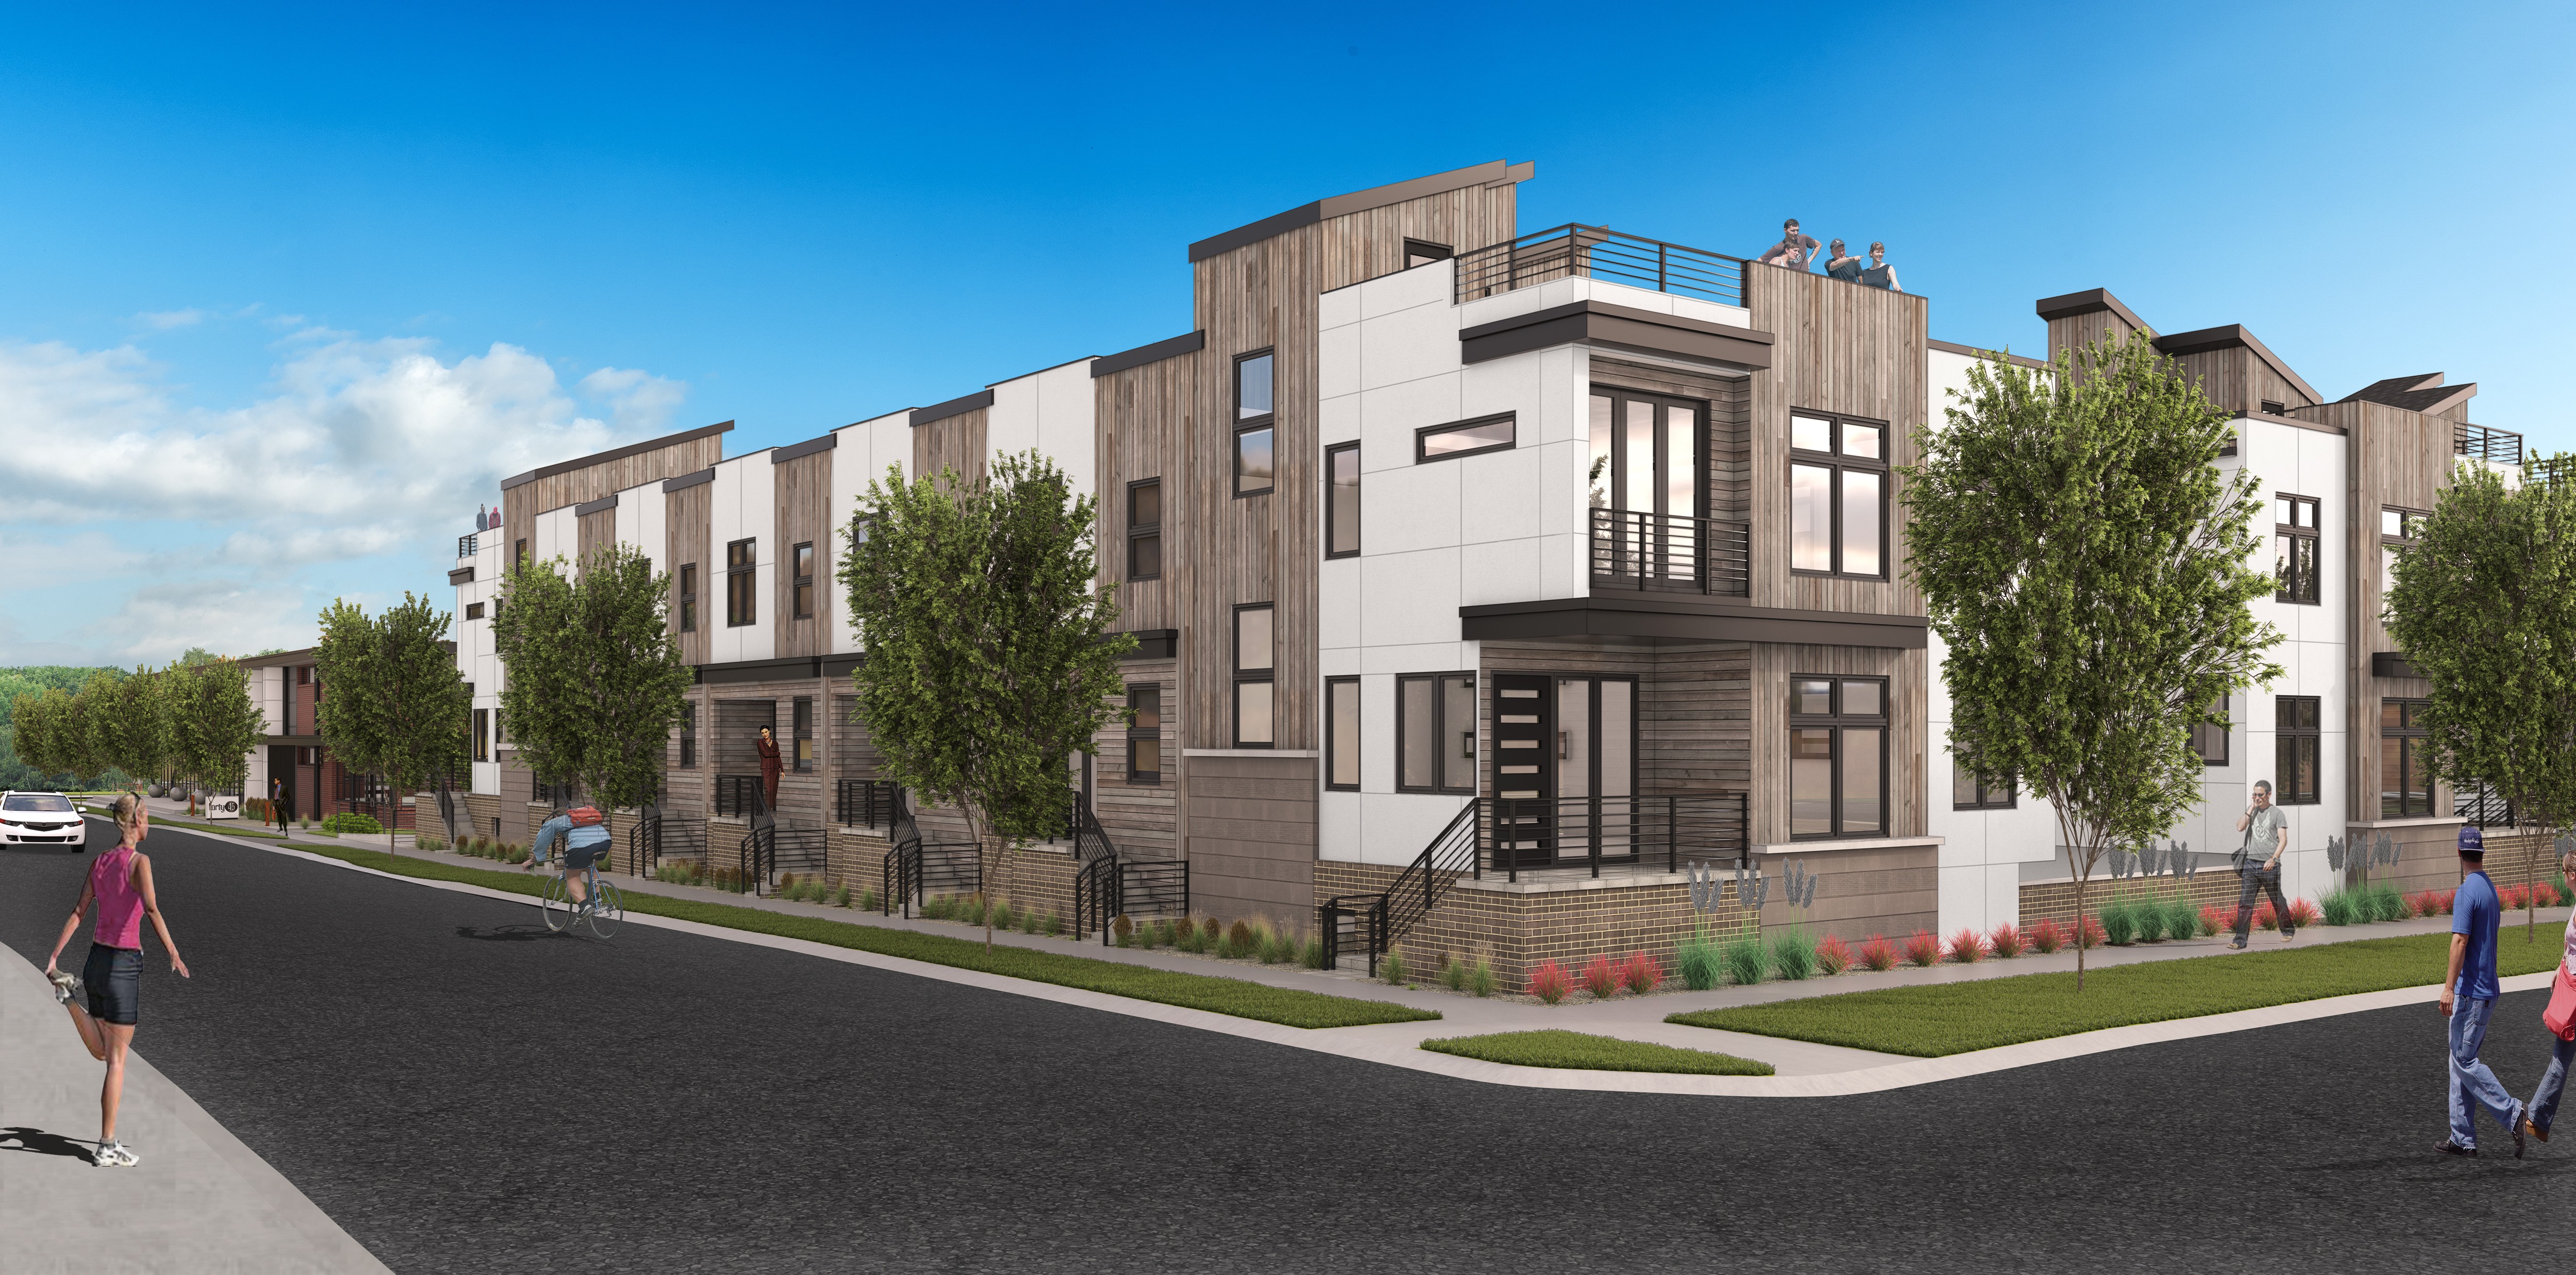 Essex arranges $12.1M financing for brand new townhome project in lease up during COVID-19 Featured Image